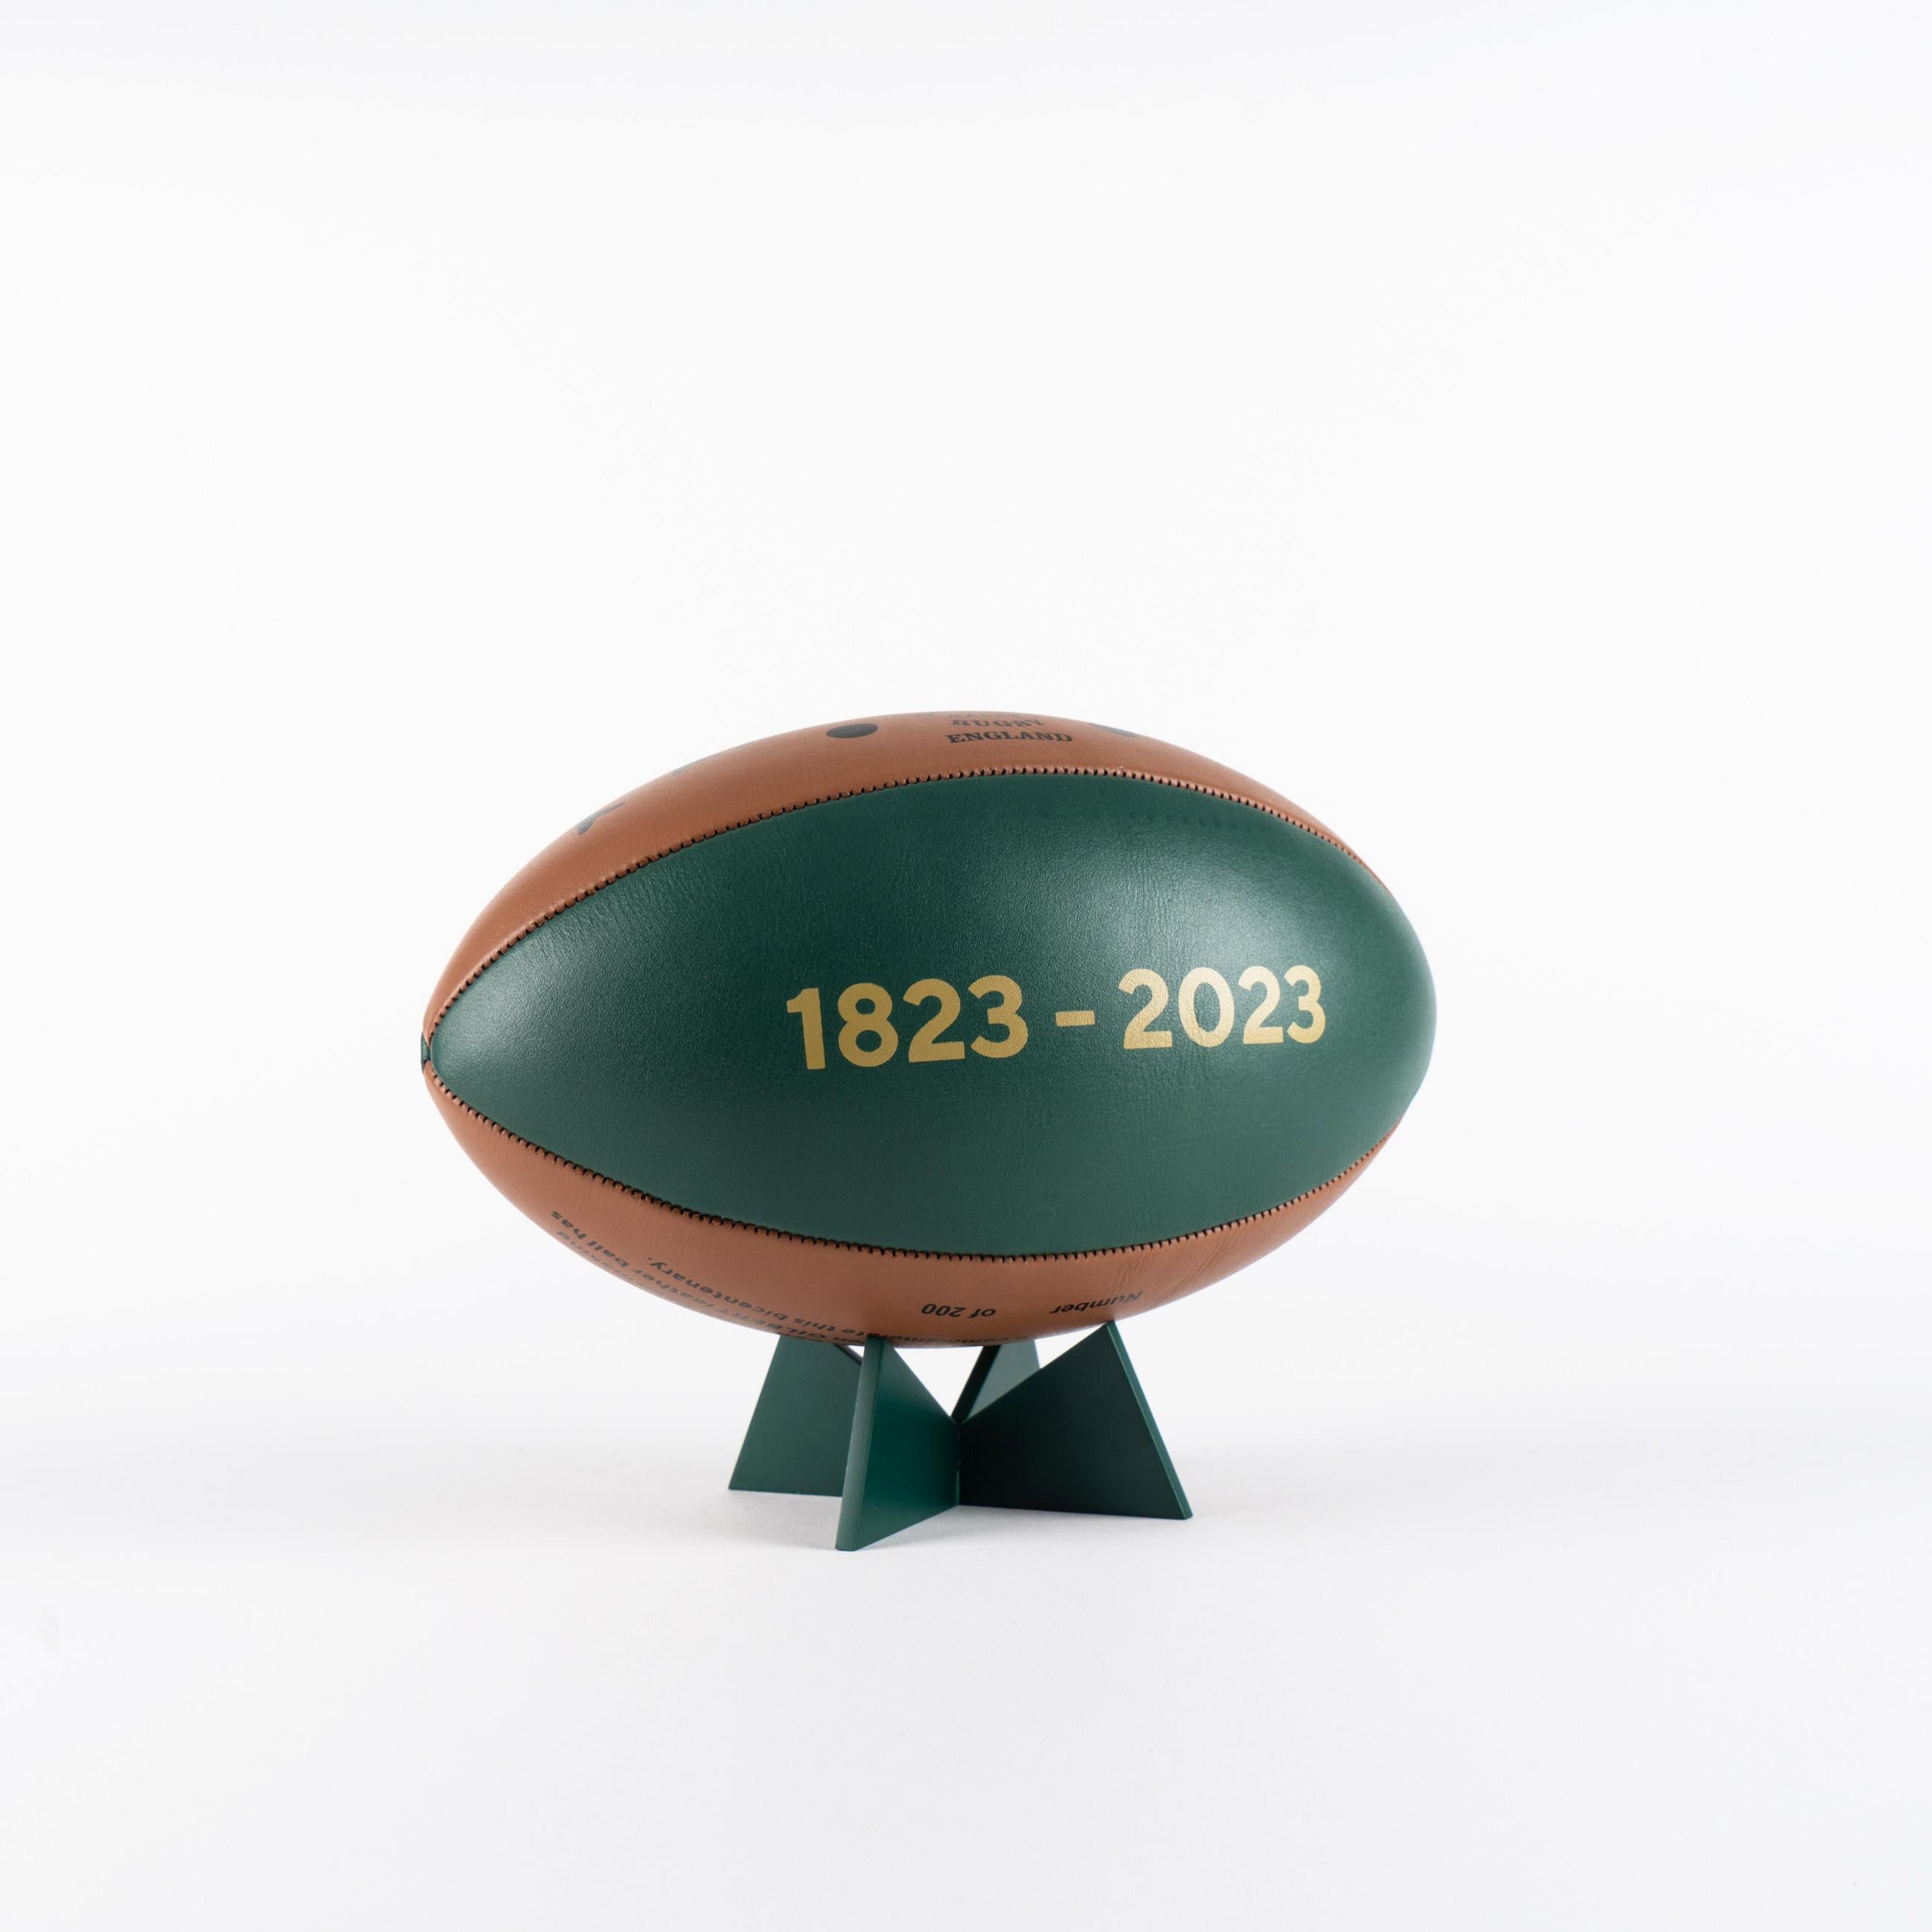 LIMITED EDITION 200 Years Leather Ball